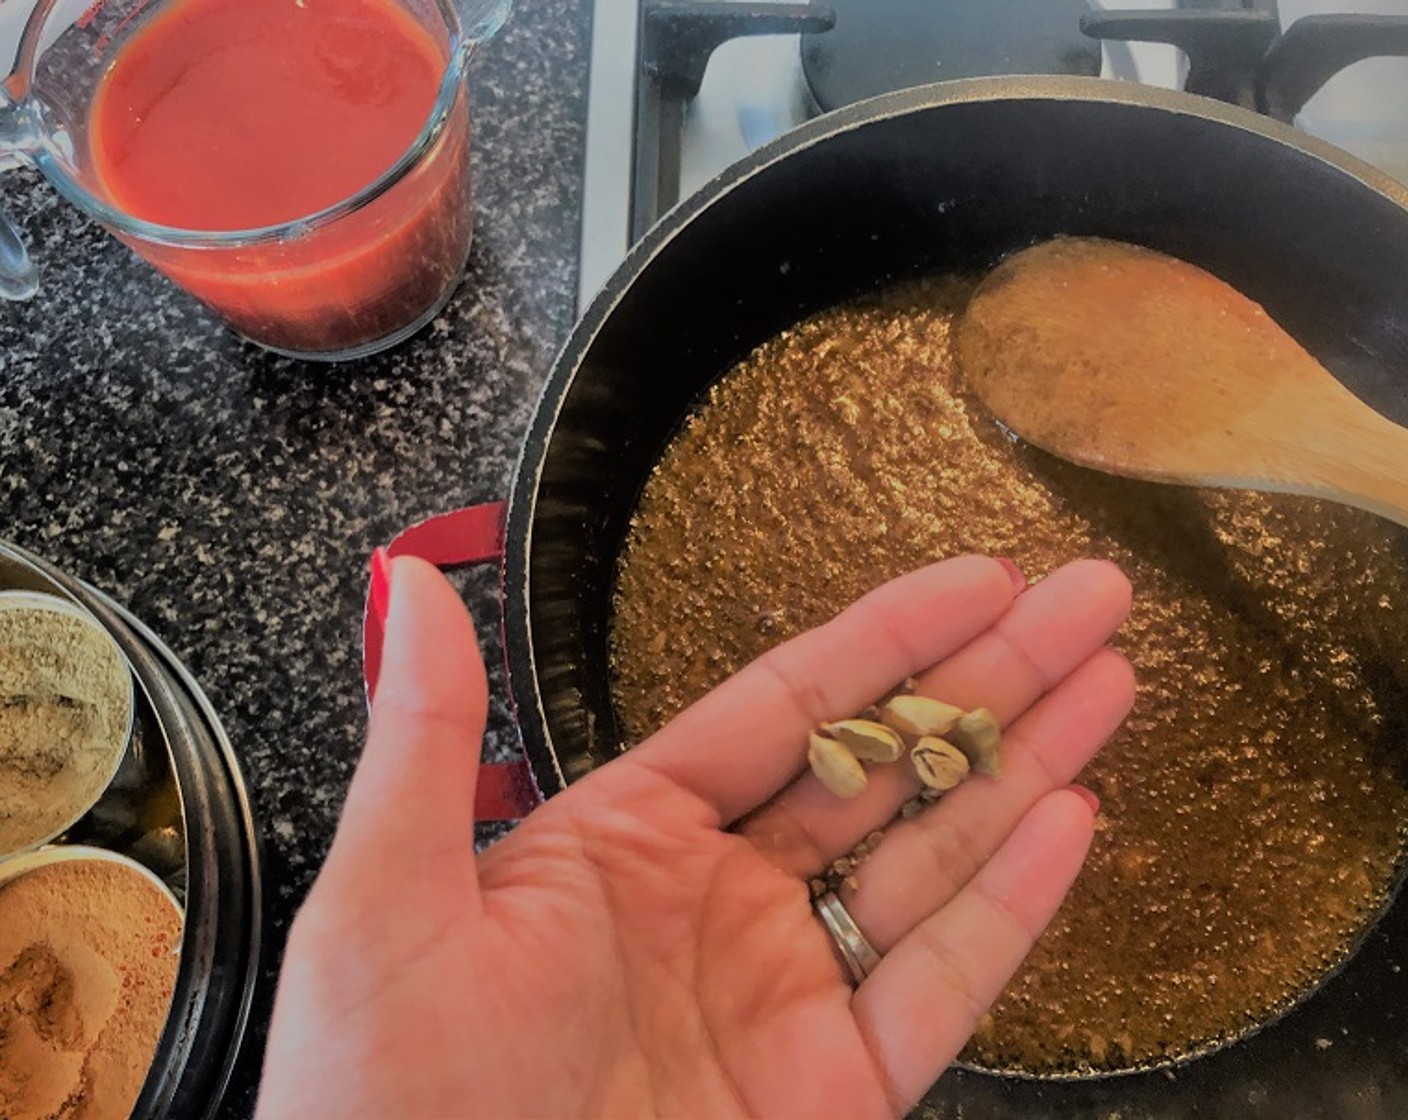 step 8 Next add in the Tomato Passata (2 1/2 cups) followed by the Red Chili Powder (1 tsp), Garam Masala (1/2 tsp), Ground Cinnamon (1/2 tsp), Caster Sugar (1/2 tsp), and simmer for 8-10 minutes. When you see the oil begin to separate you will know the gravy is ready.